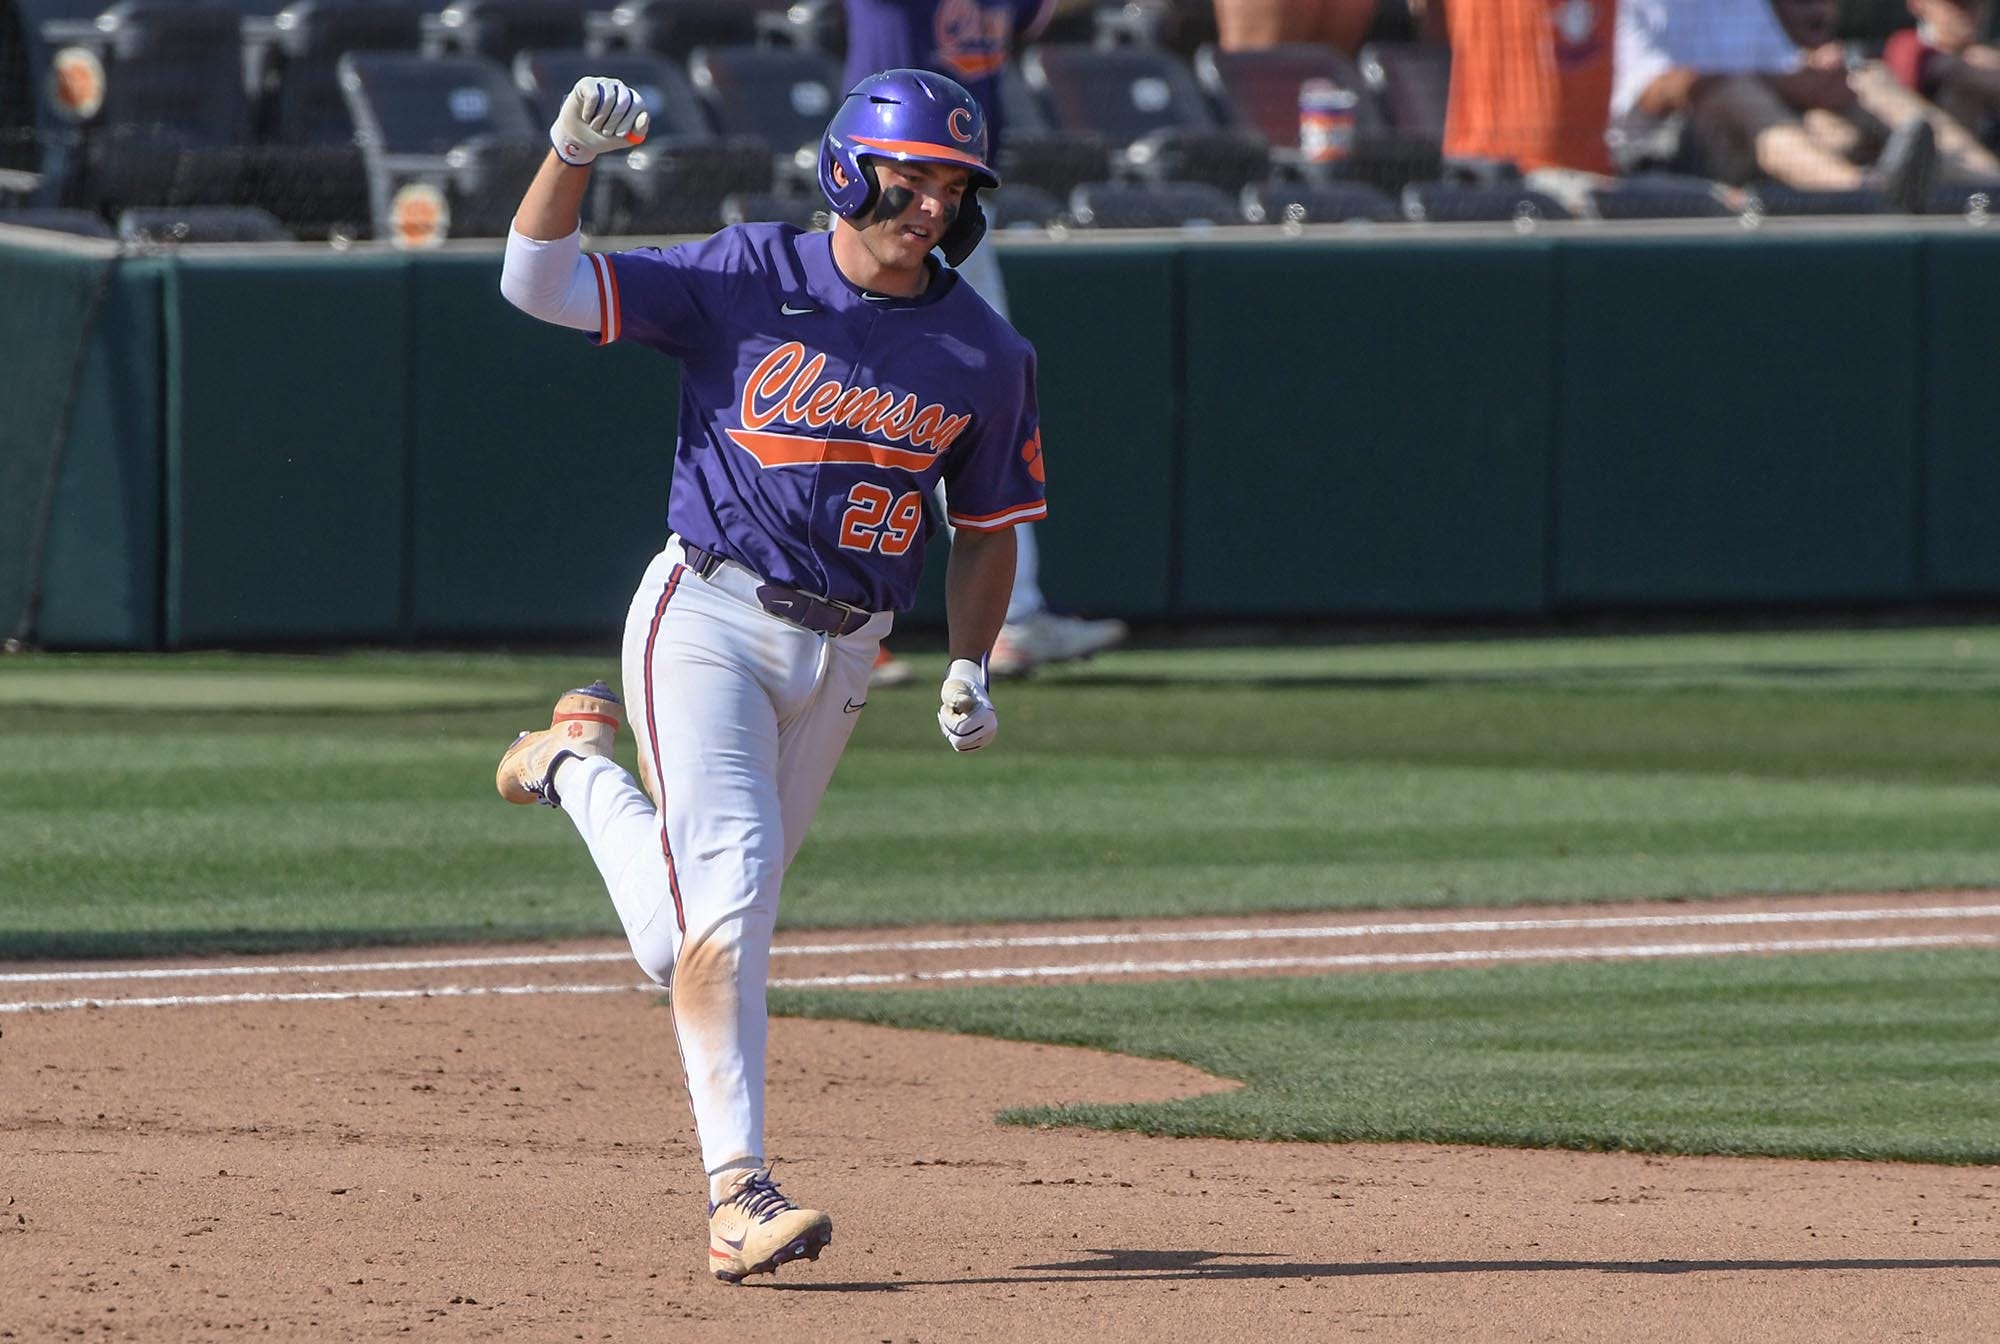 Max Wagner, the Orioles second round pick, rounds the bases after hitting a three-run home run for Clemson.